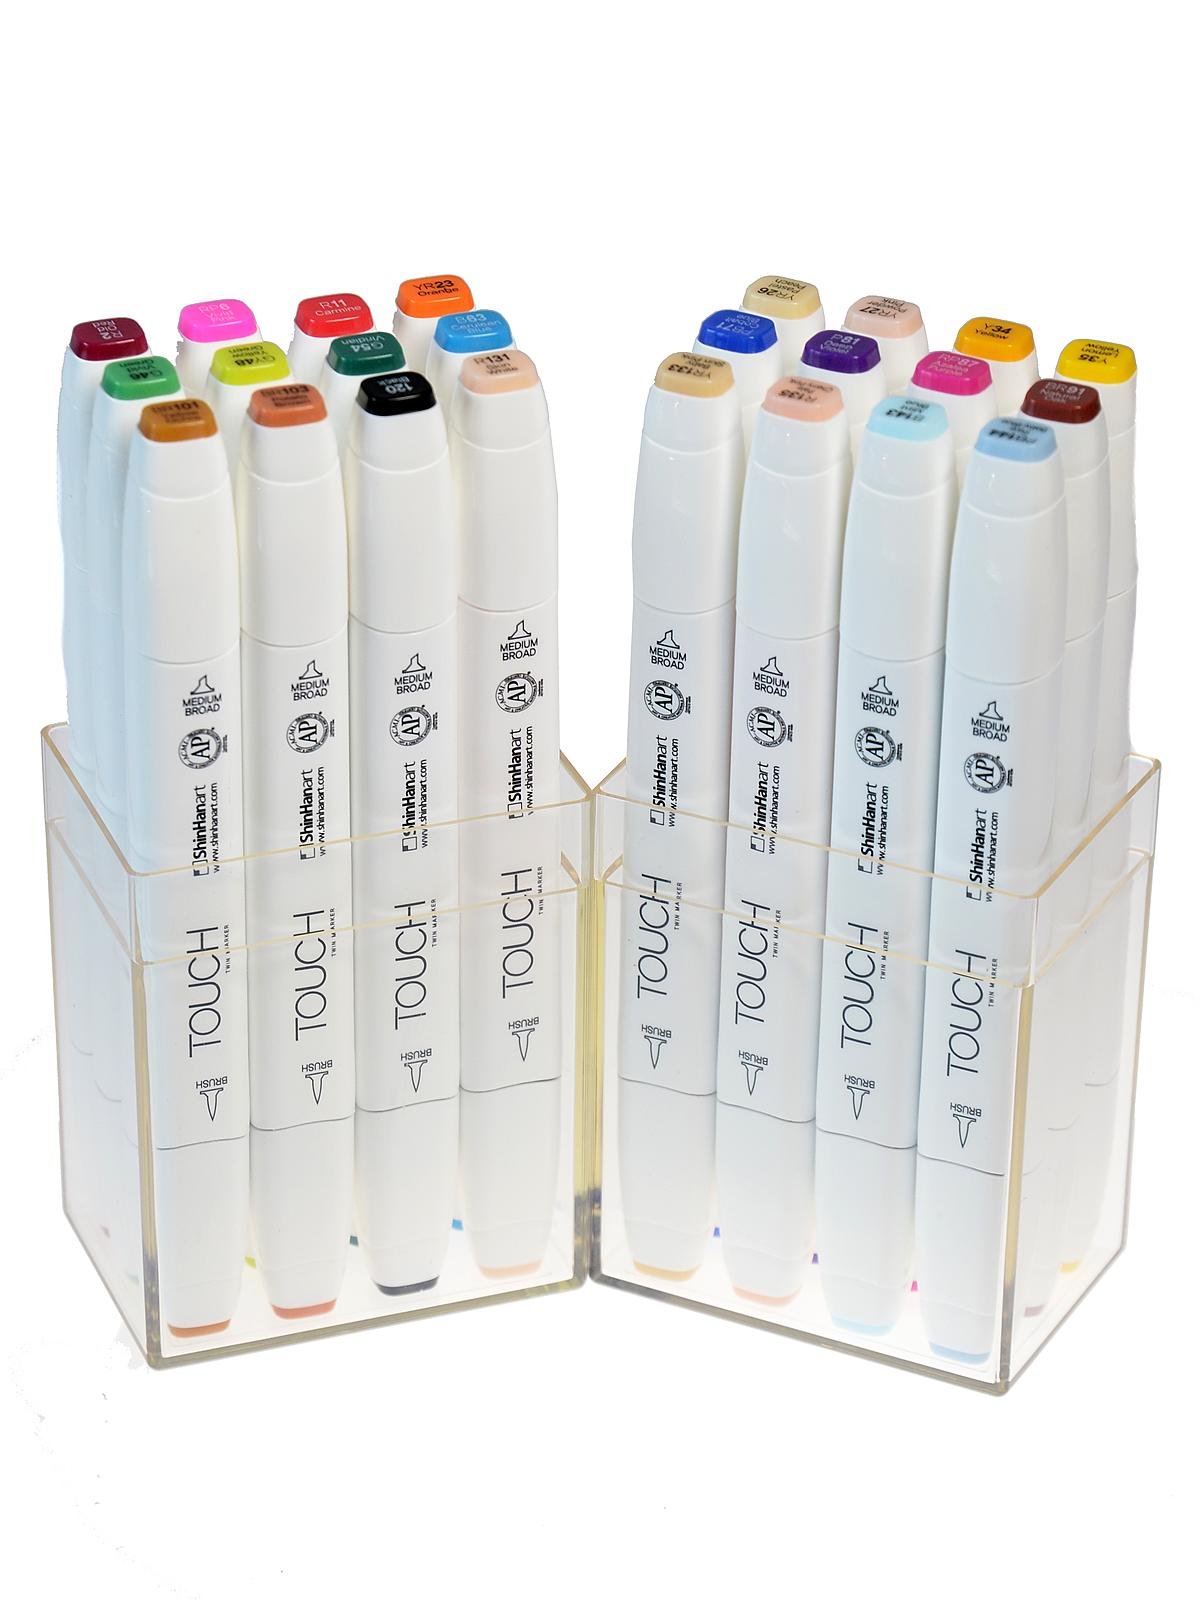 ShinHan Touch Twin Brush Marker Sets